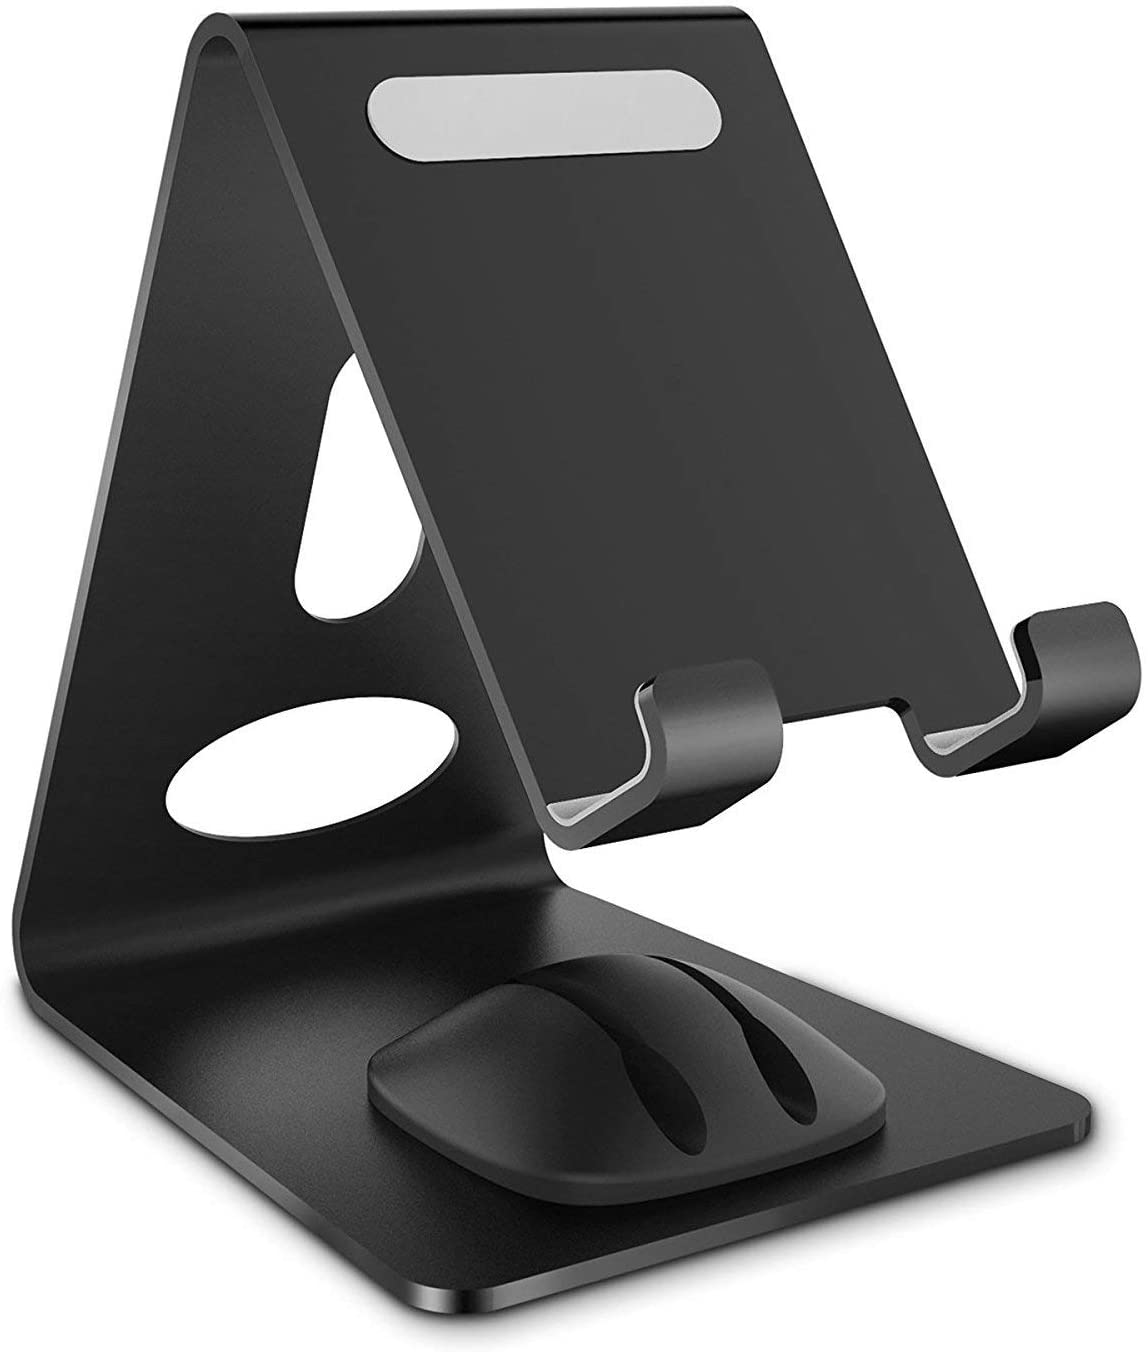 Phone Stand, WixGear Premium Phone Holder for iPhones, Android Smartphones & Mini Tablets